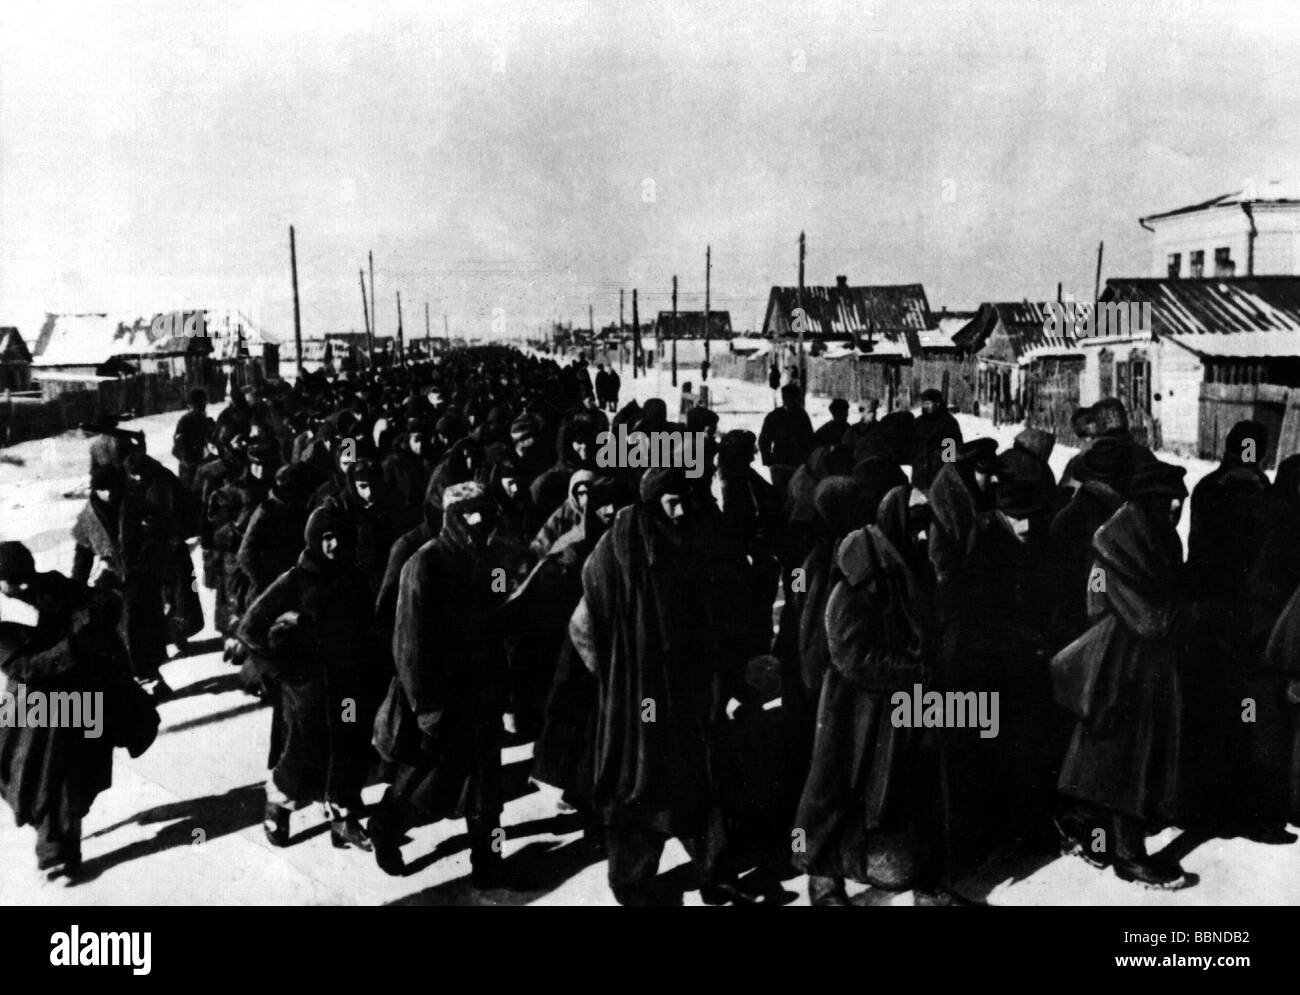 events, Second World War / WWII, Russia, Stalingrad 1942 / 1943, a column of German prisoners of war after the battle, early February 1943, Russia, Soviet Union, USSR, captivity, march, marching, Wehrmacht, Eastern Front, defeat, battle, 20th century, historic, historical, Third Reich, 1940s, people, Stock Photo